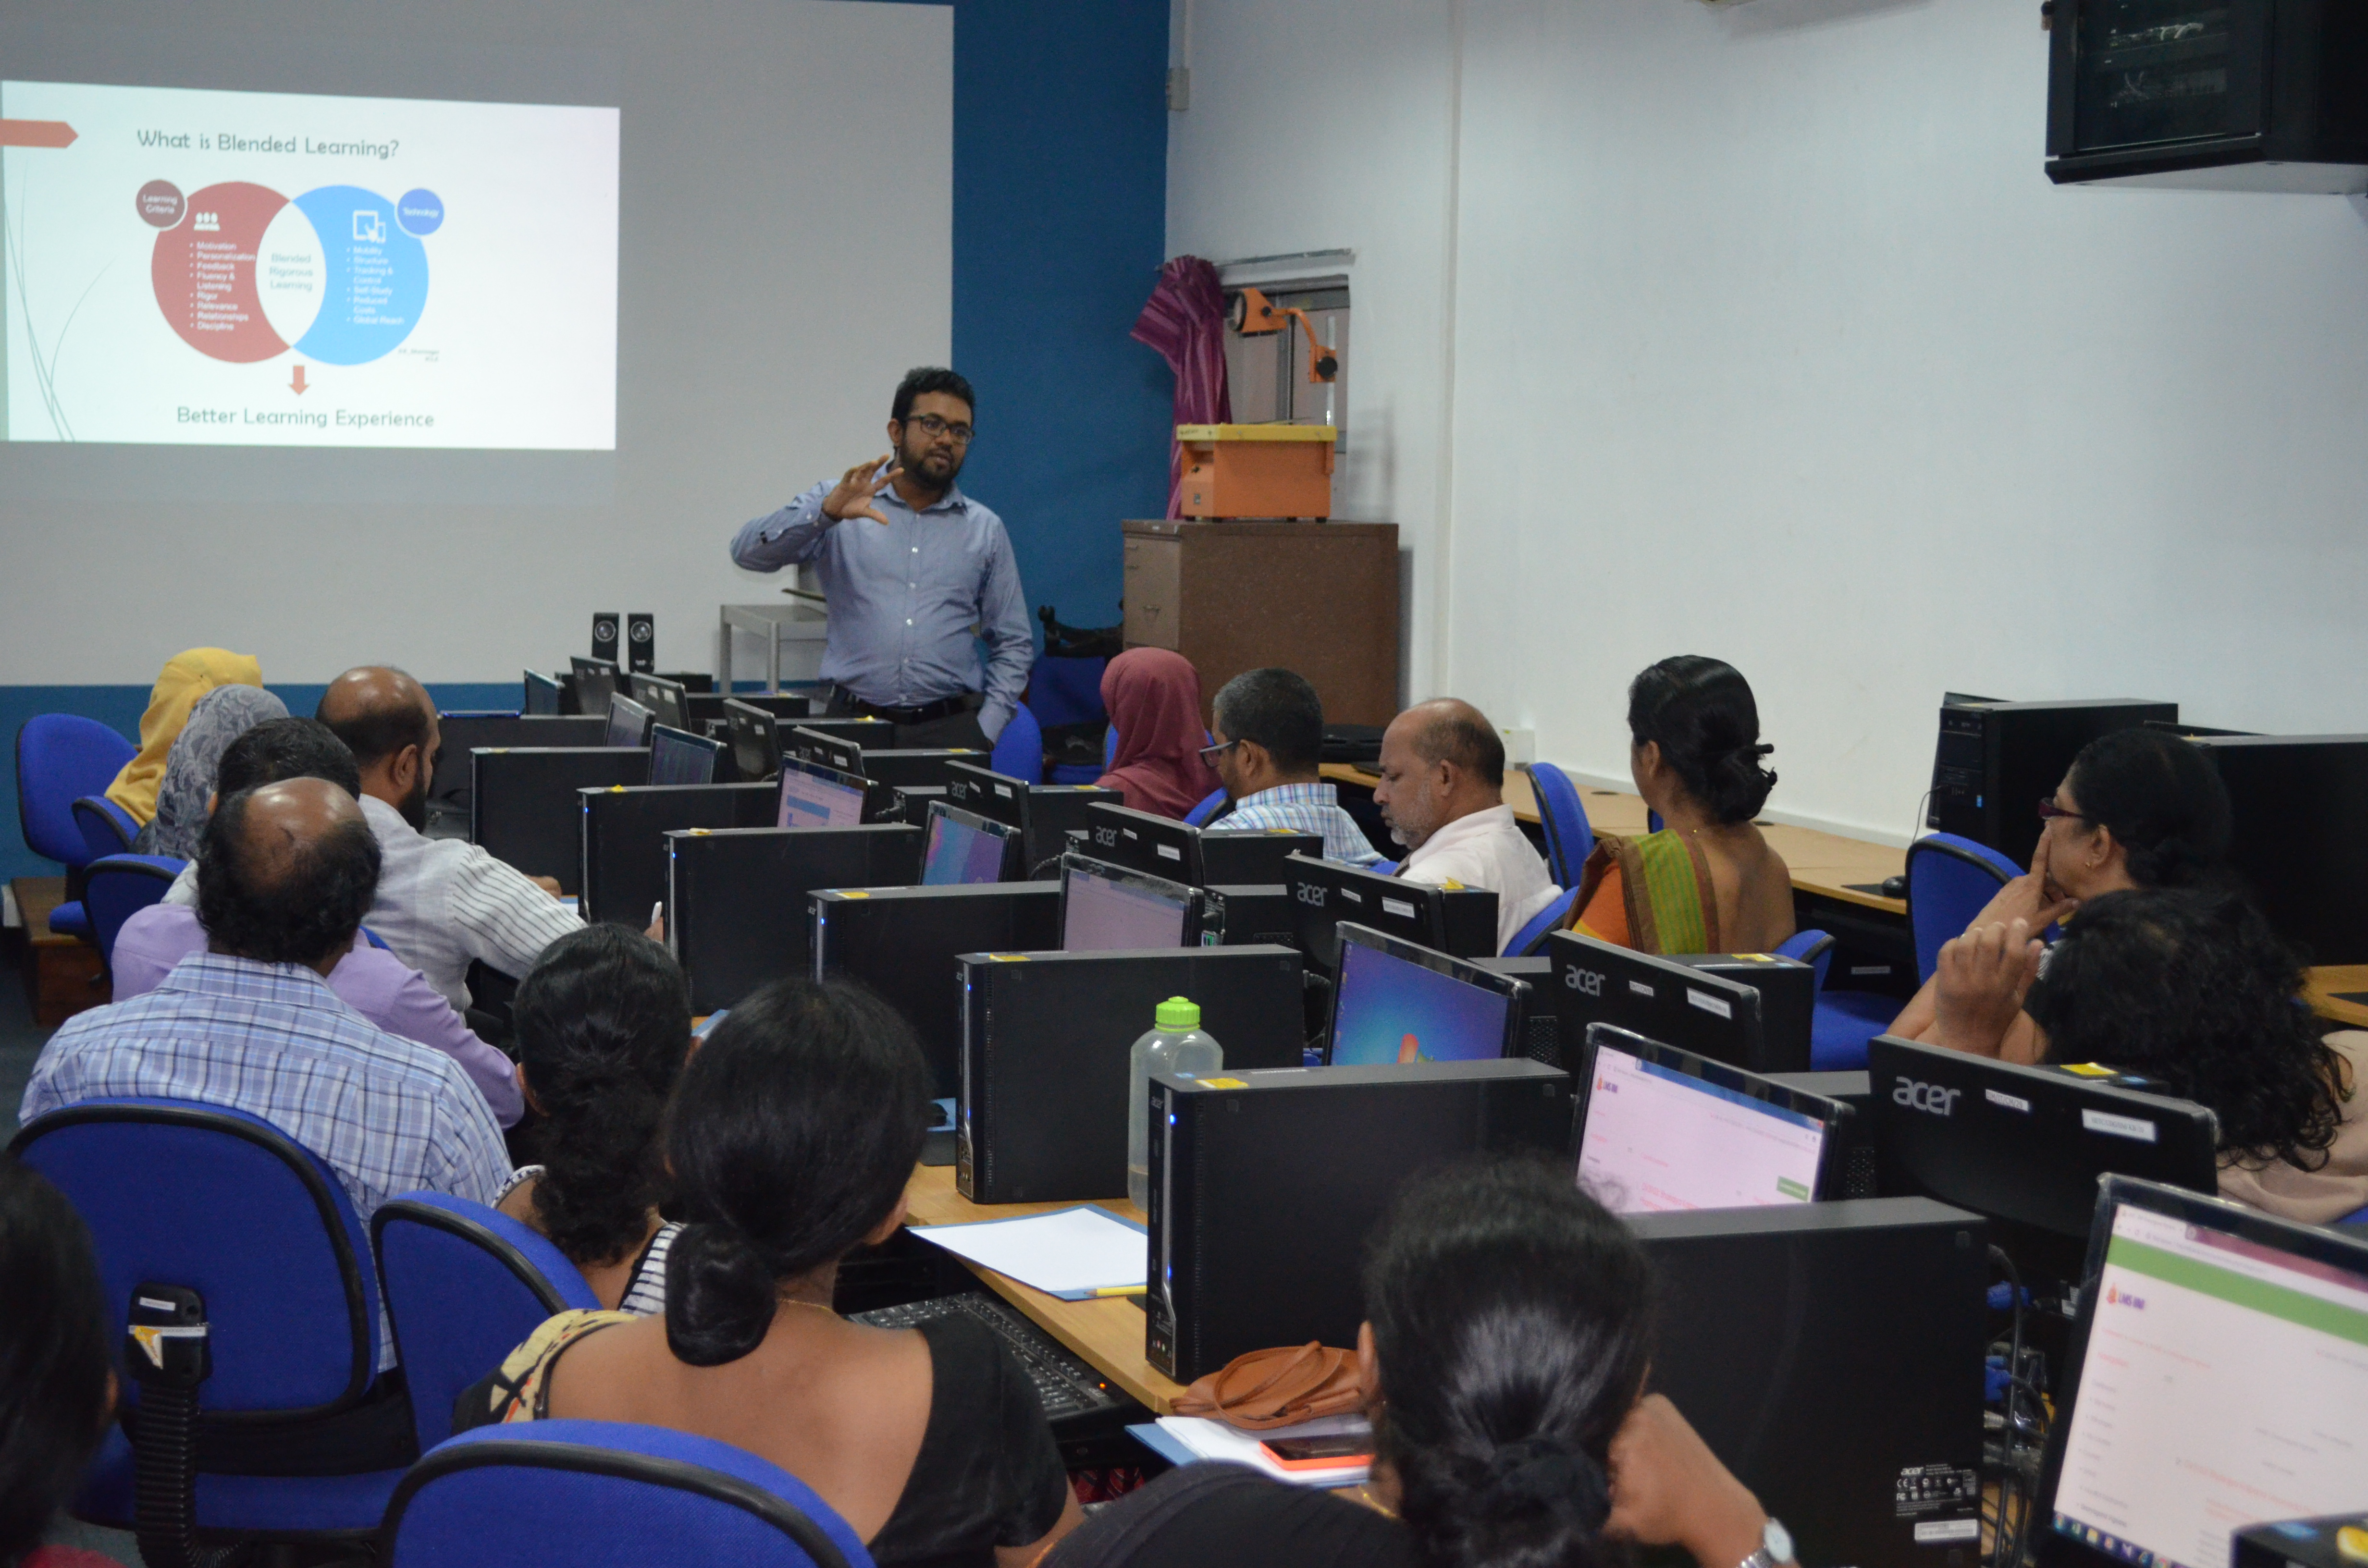 Workshop on Blended Learning for Academic Staff of the IIM